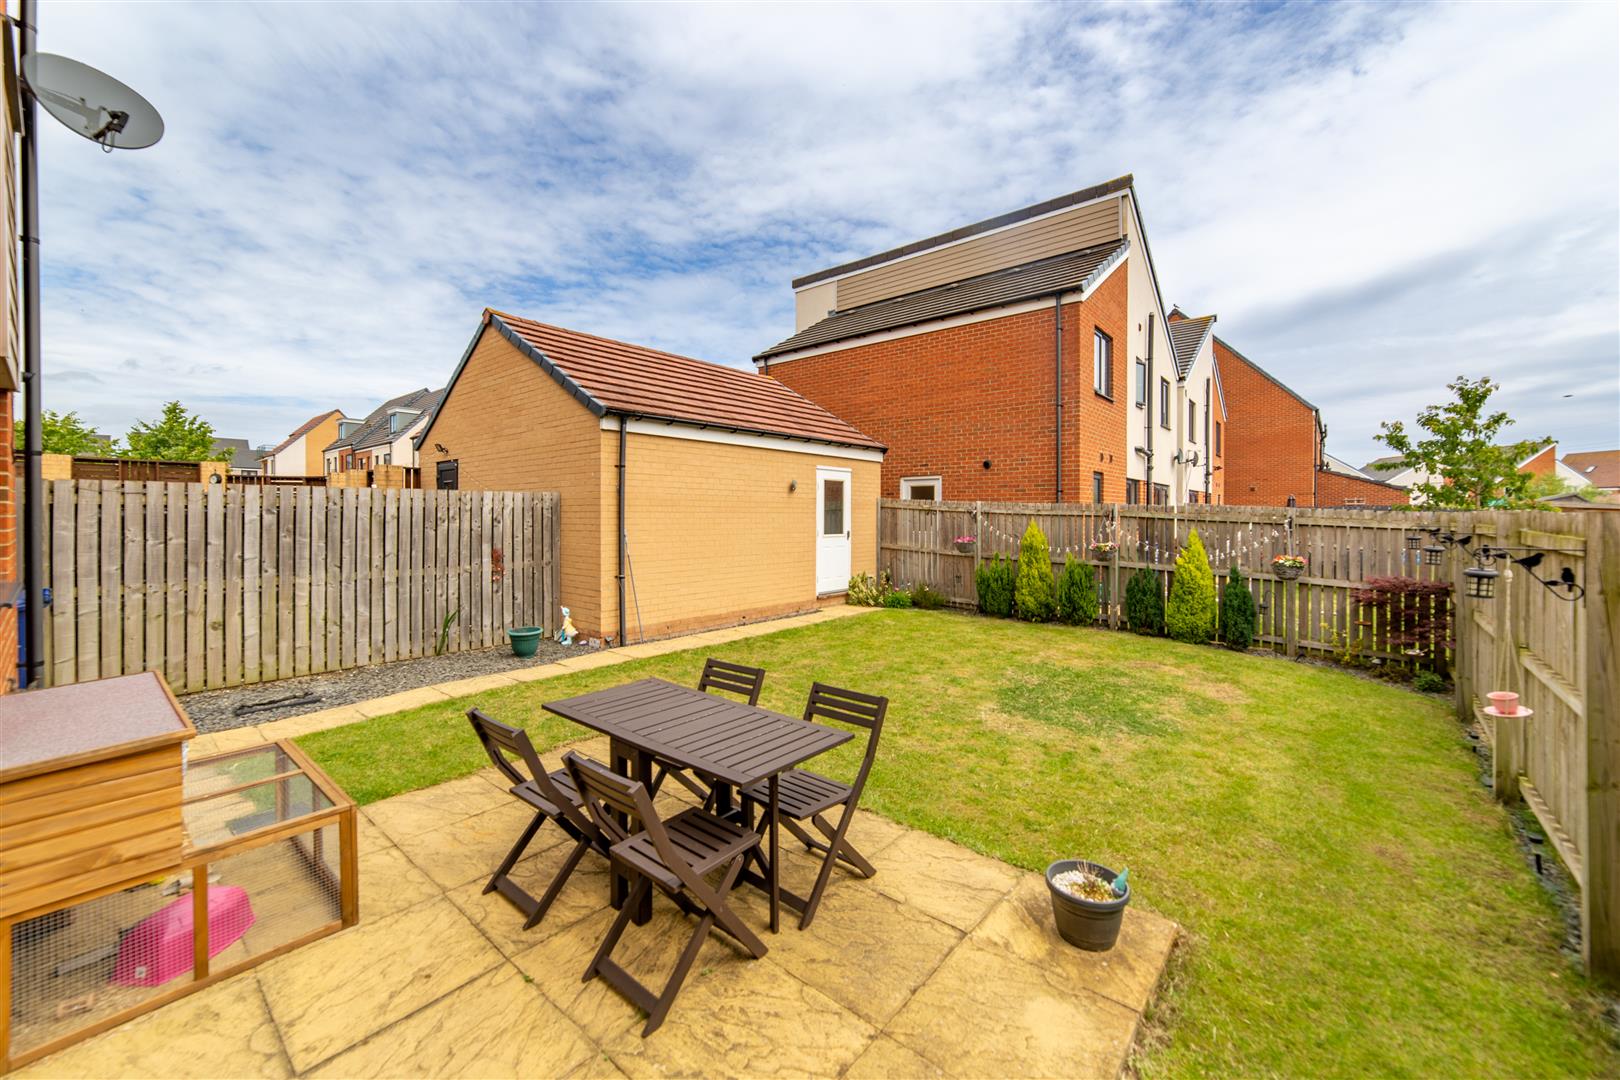 4 bed detached house for sale in Maynard Street, Great Park 18